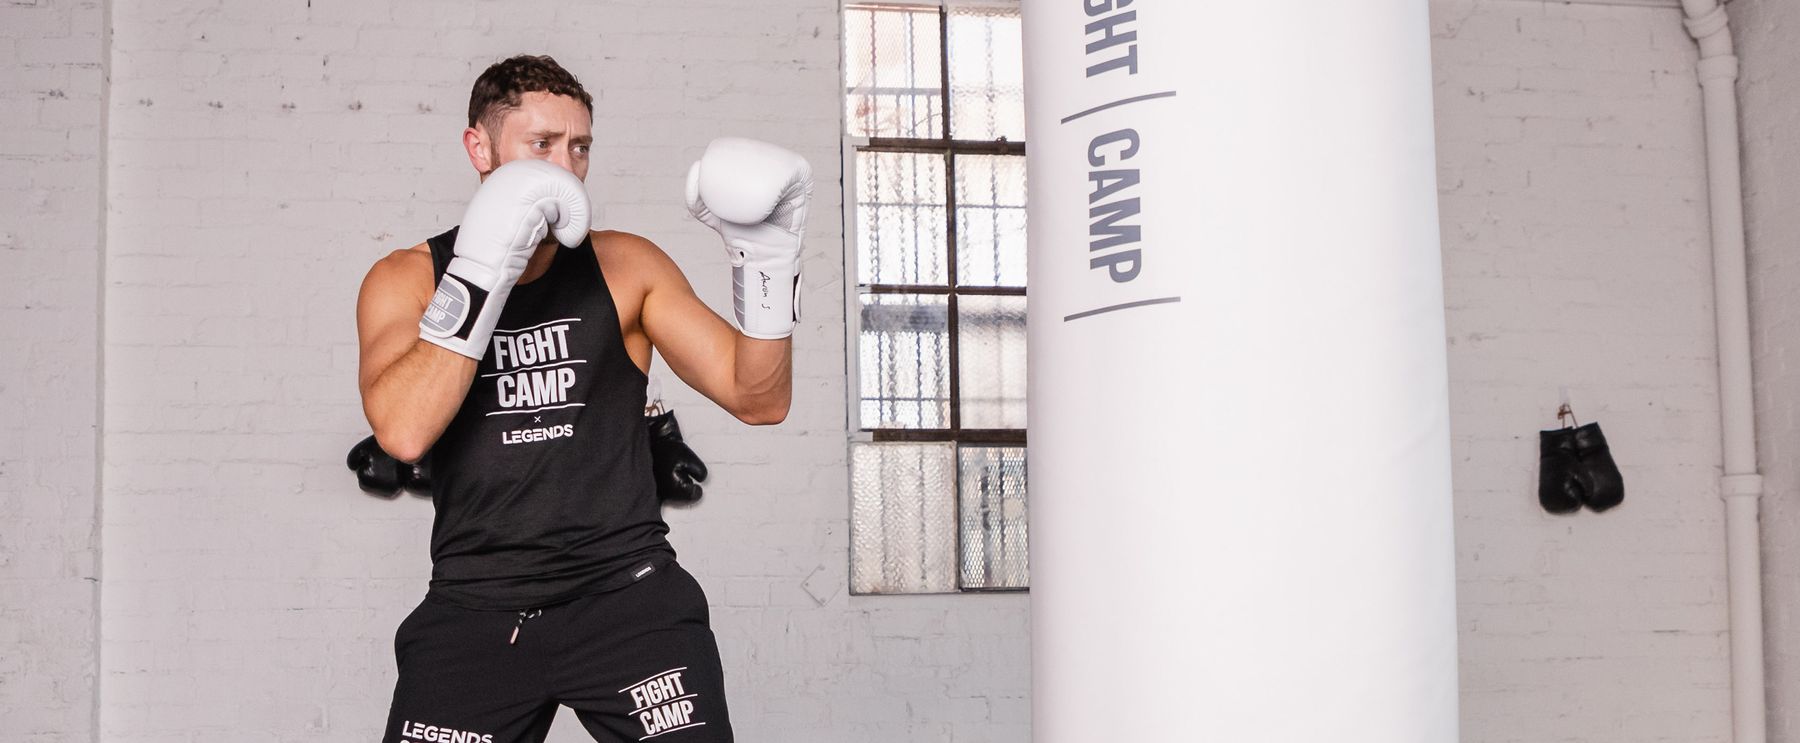 FightCamp - Best Boxing Gloves for Training